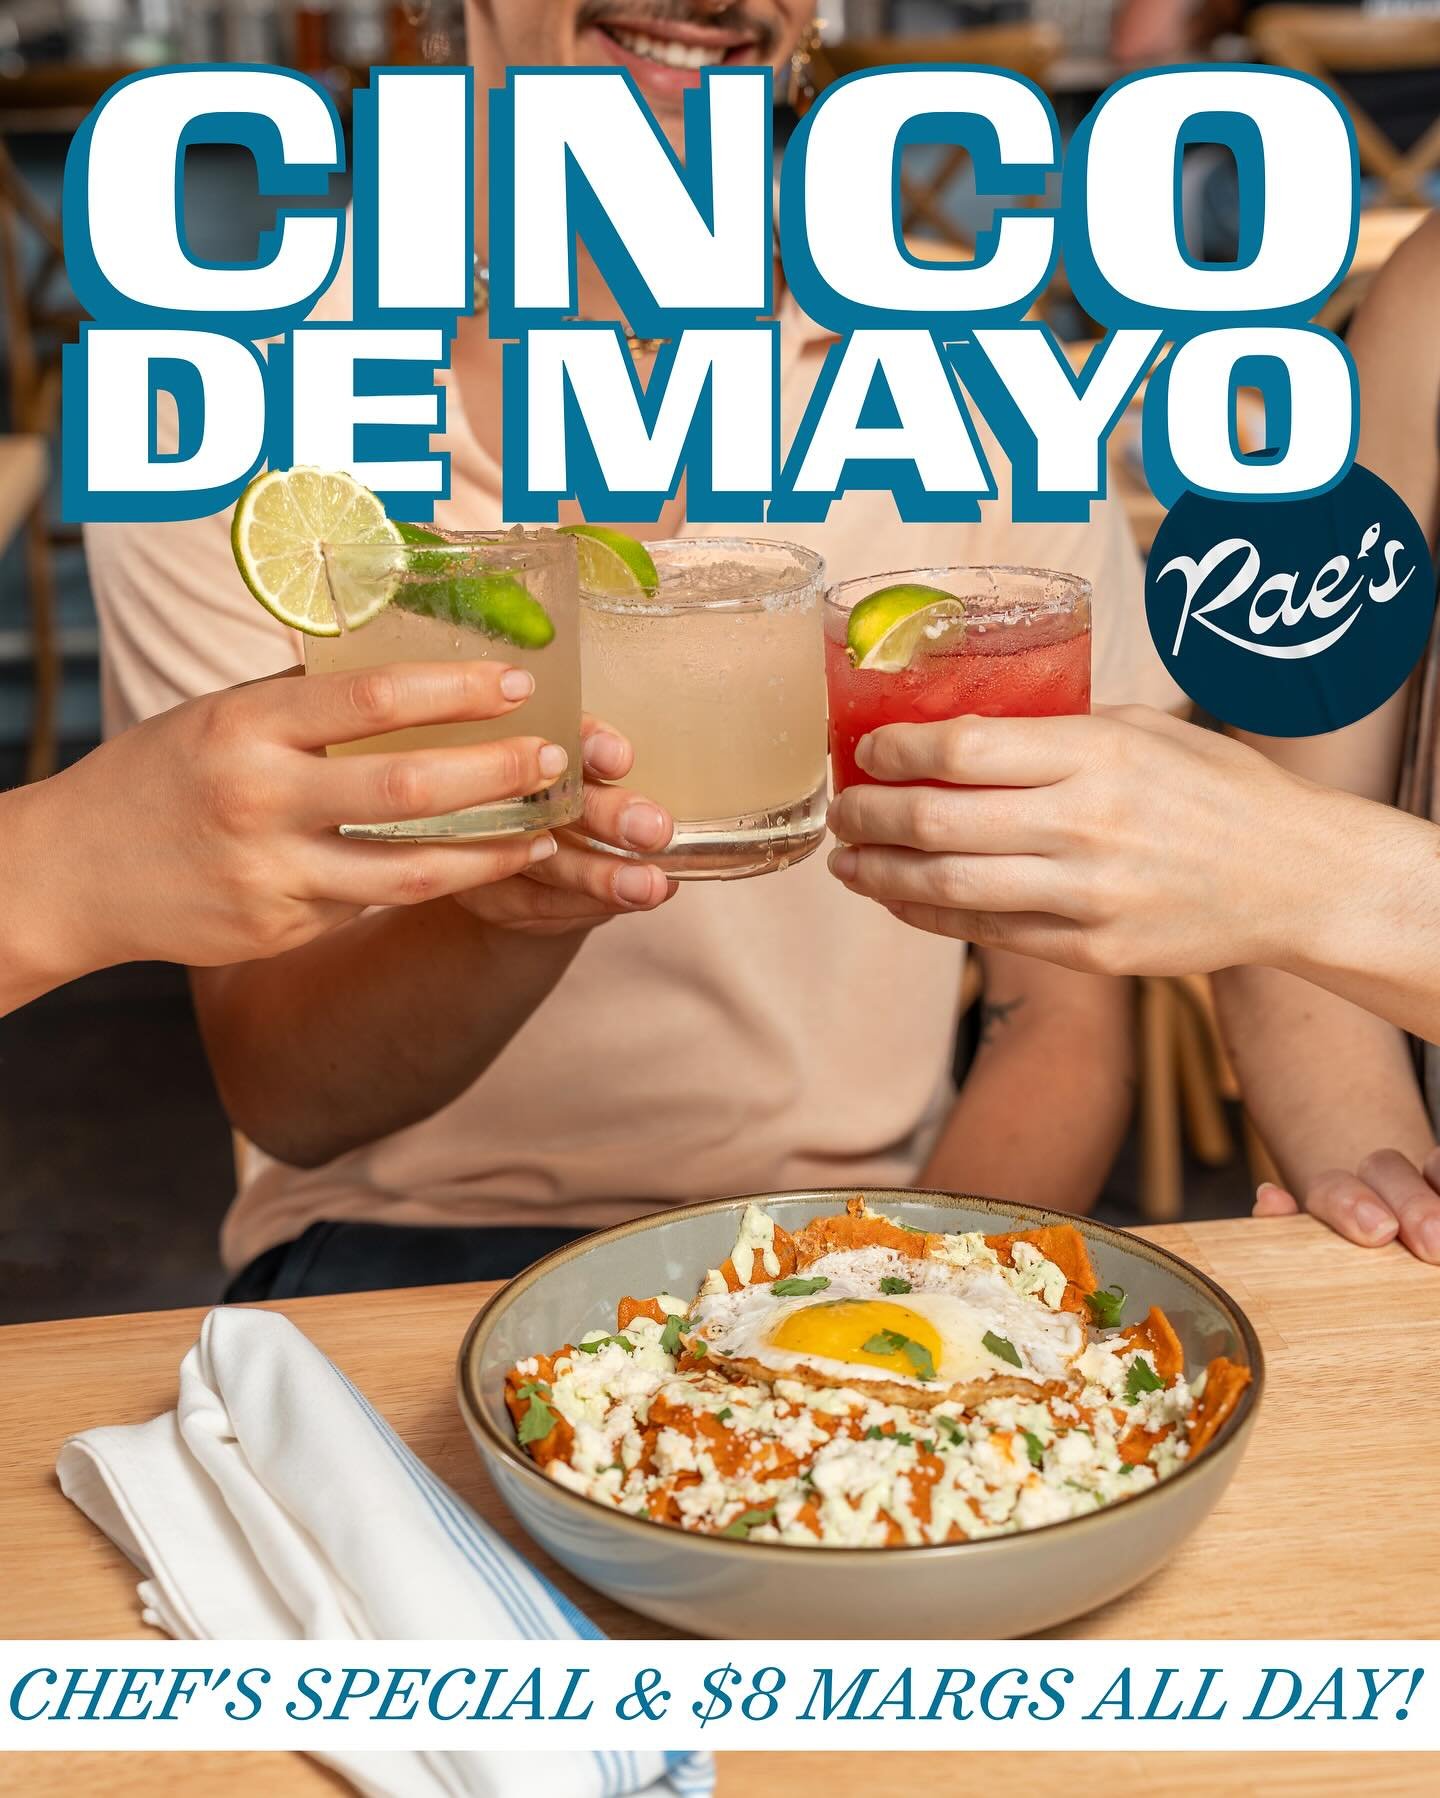 Shake up your Cinco de Mayo at Rae&rsquo;s with our Chef&rsquo;s Special &amp; All Day Marg Special this Sunday 🍋&zwj;🟩

Our chefs have been hard at work perfecting  Chilaquiles, a traditional Mexican dish with chips, salsa, and topped with a fried